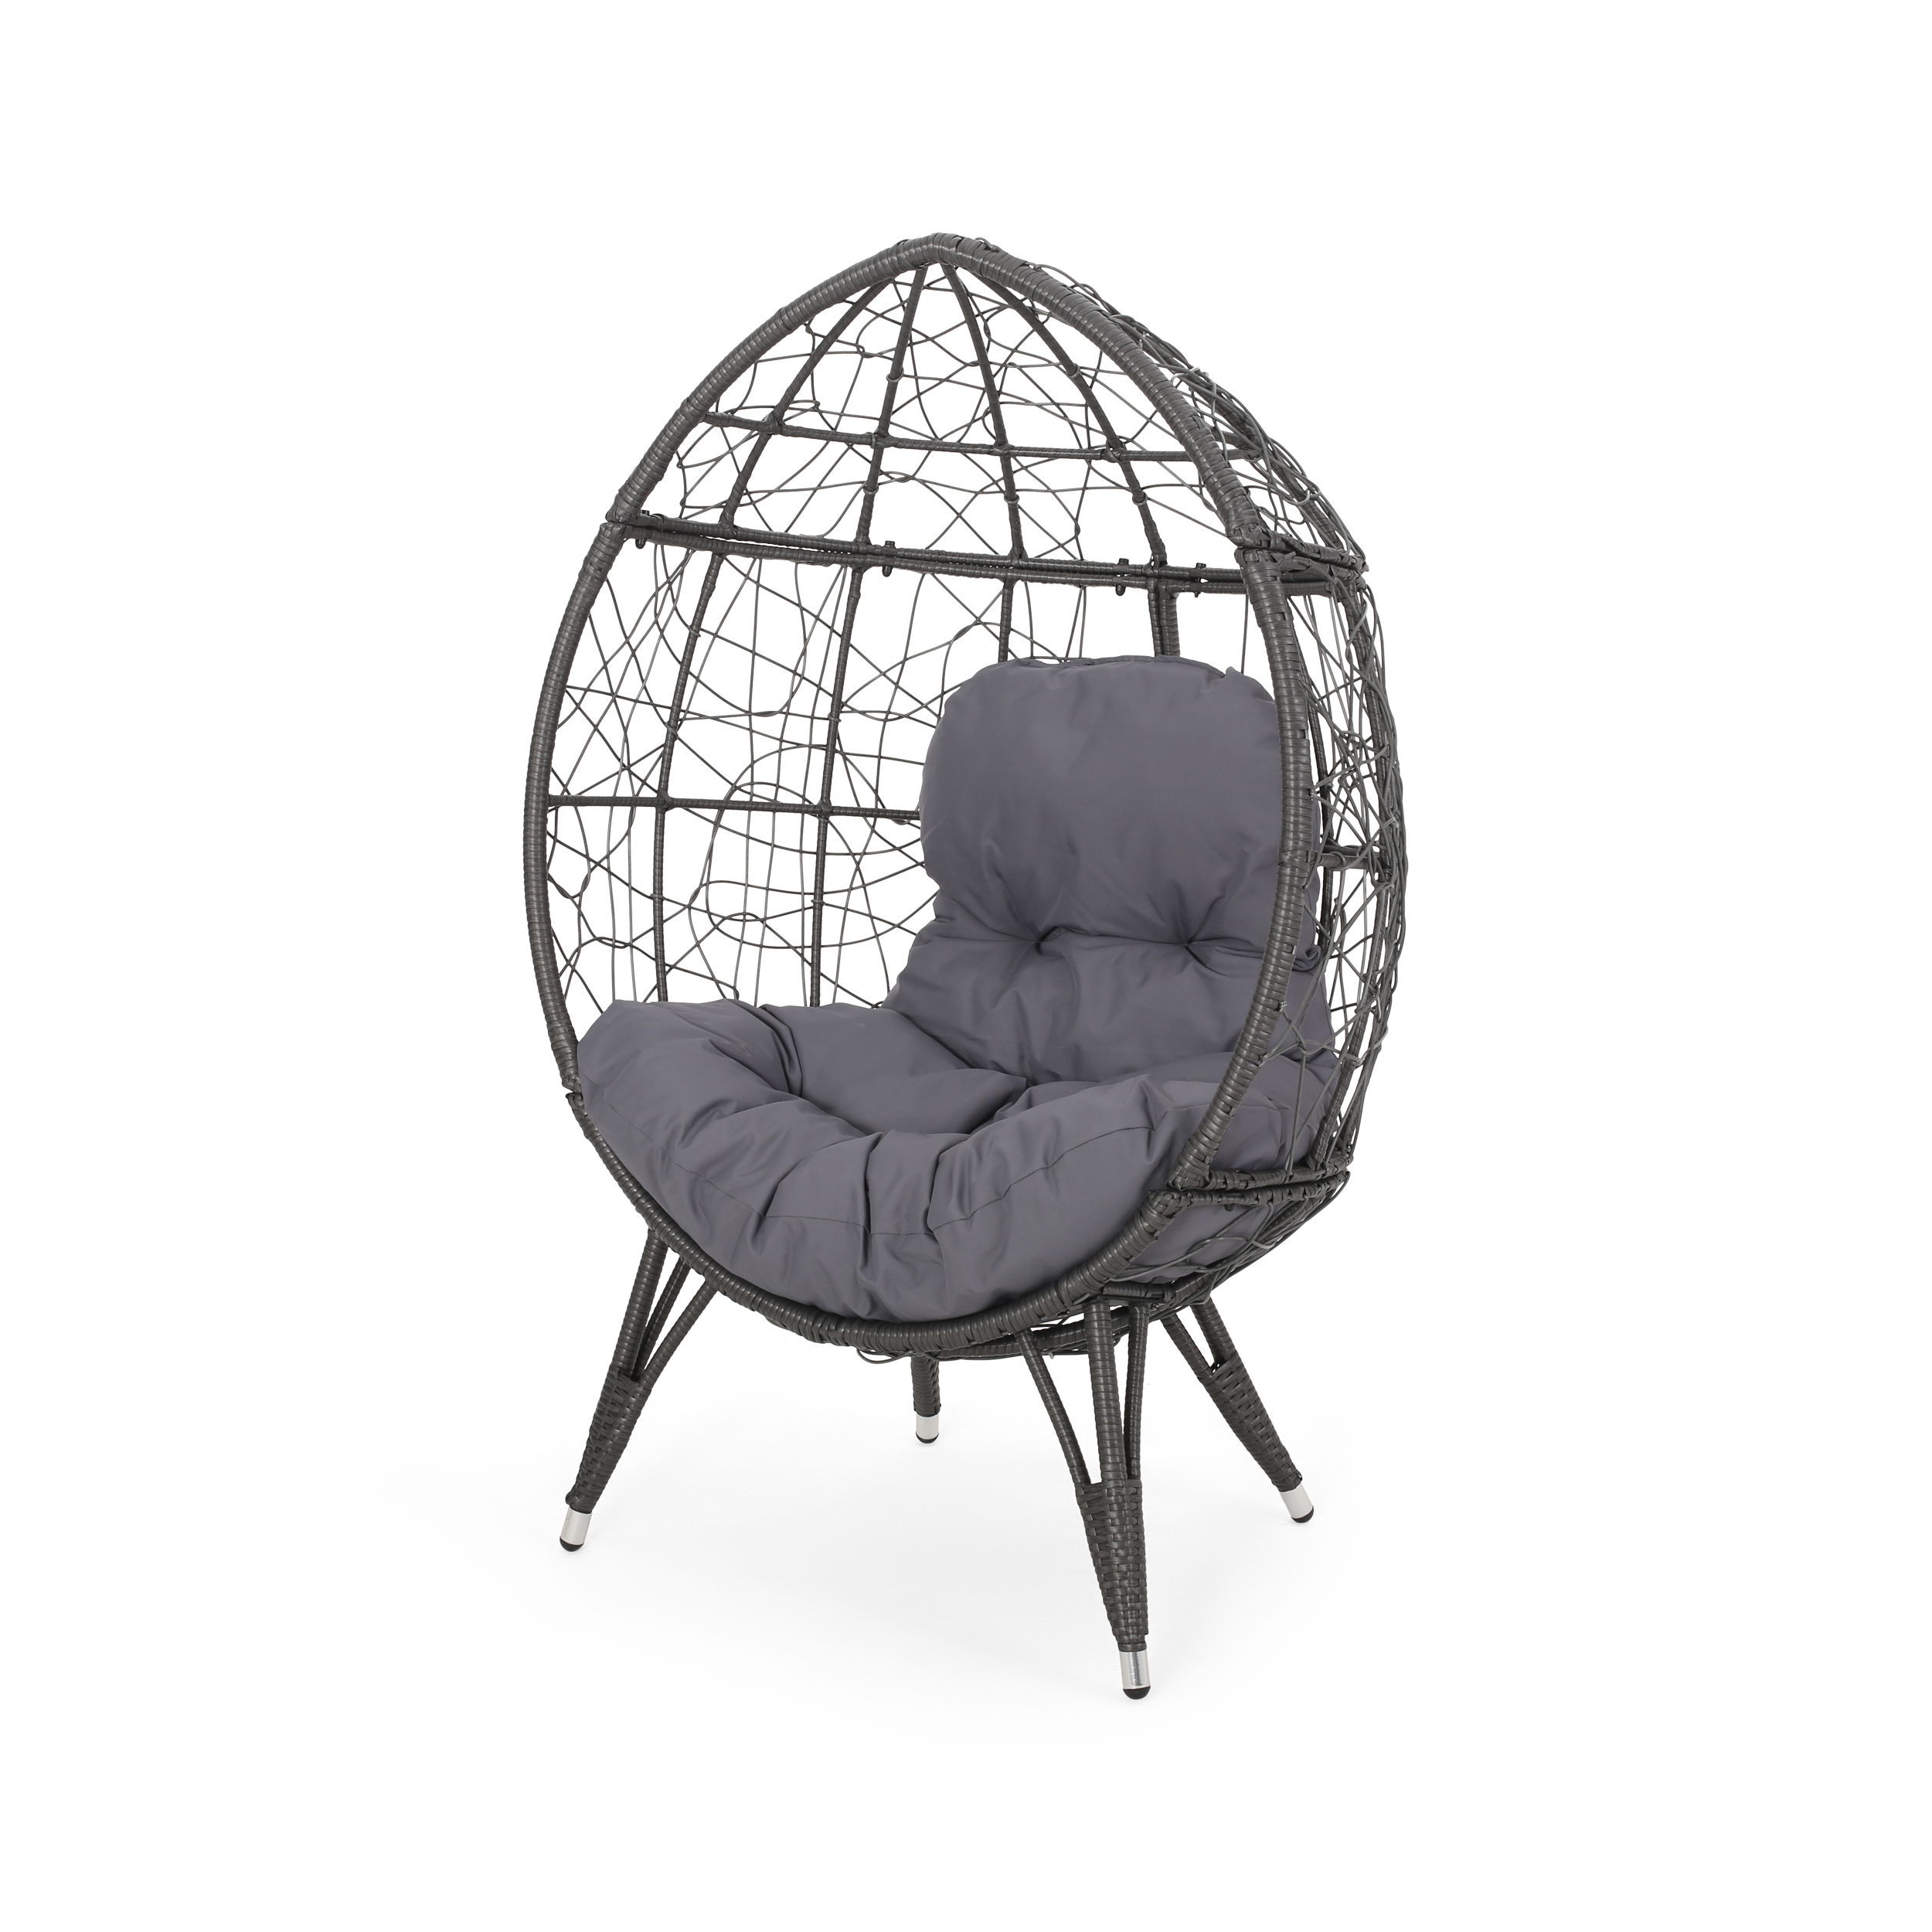 Keondre Indoor Wicker Teardrop Chair with Cushion, Gray and Dark Gray - image 1 of 11